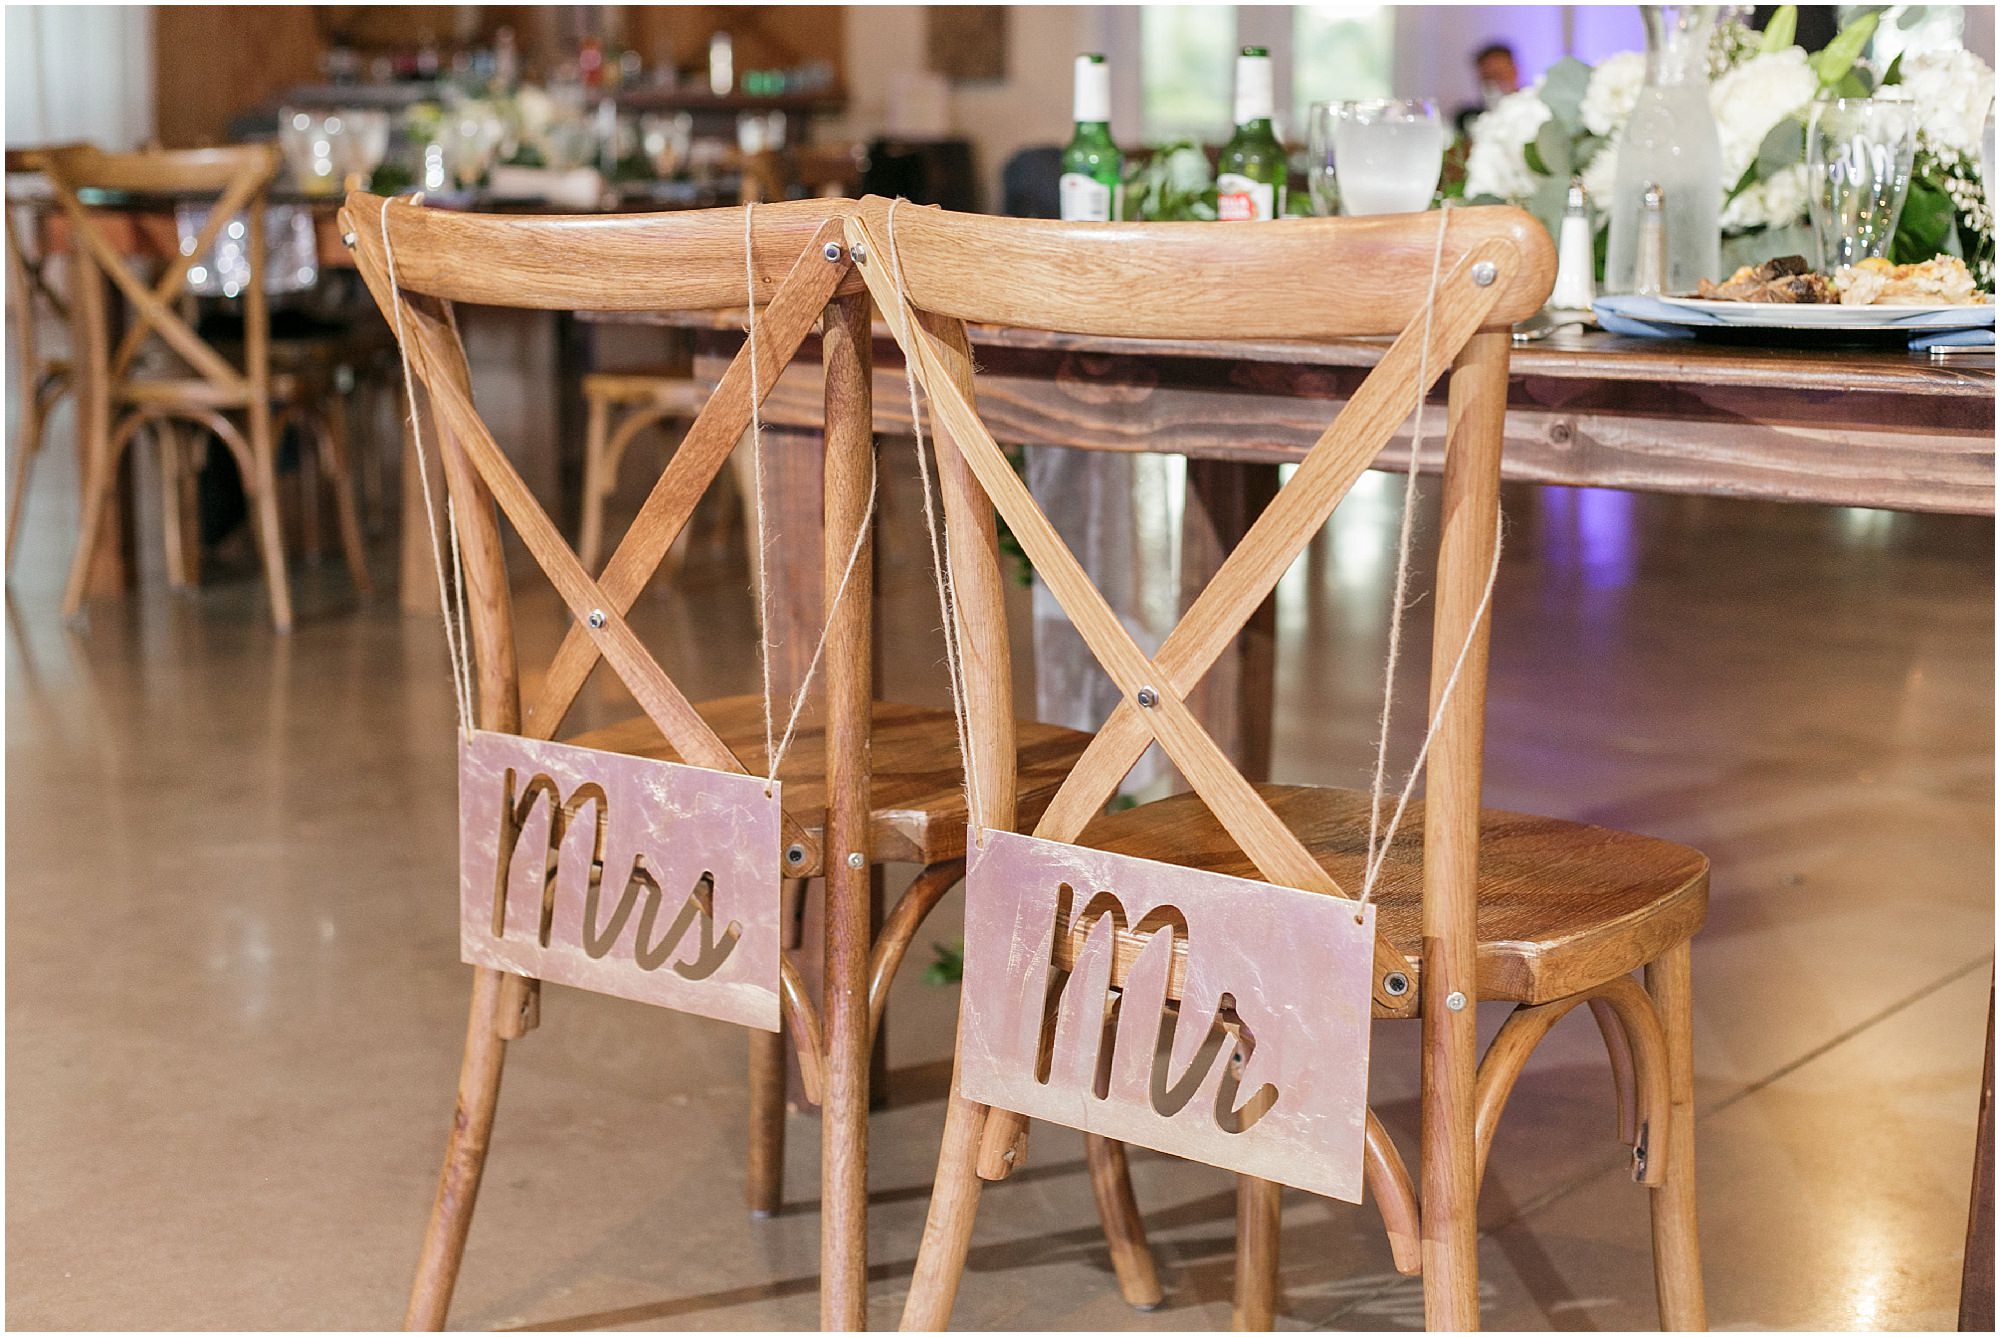 Stencils from iron sheets saying "Mr" and "Mrs" hanging on the back of the bride and groom's chairs. 